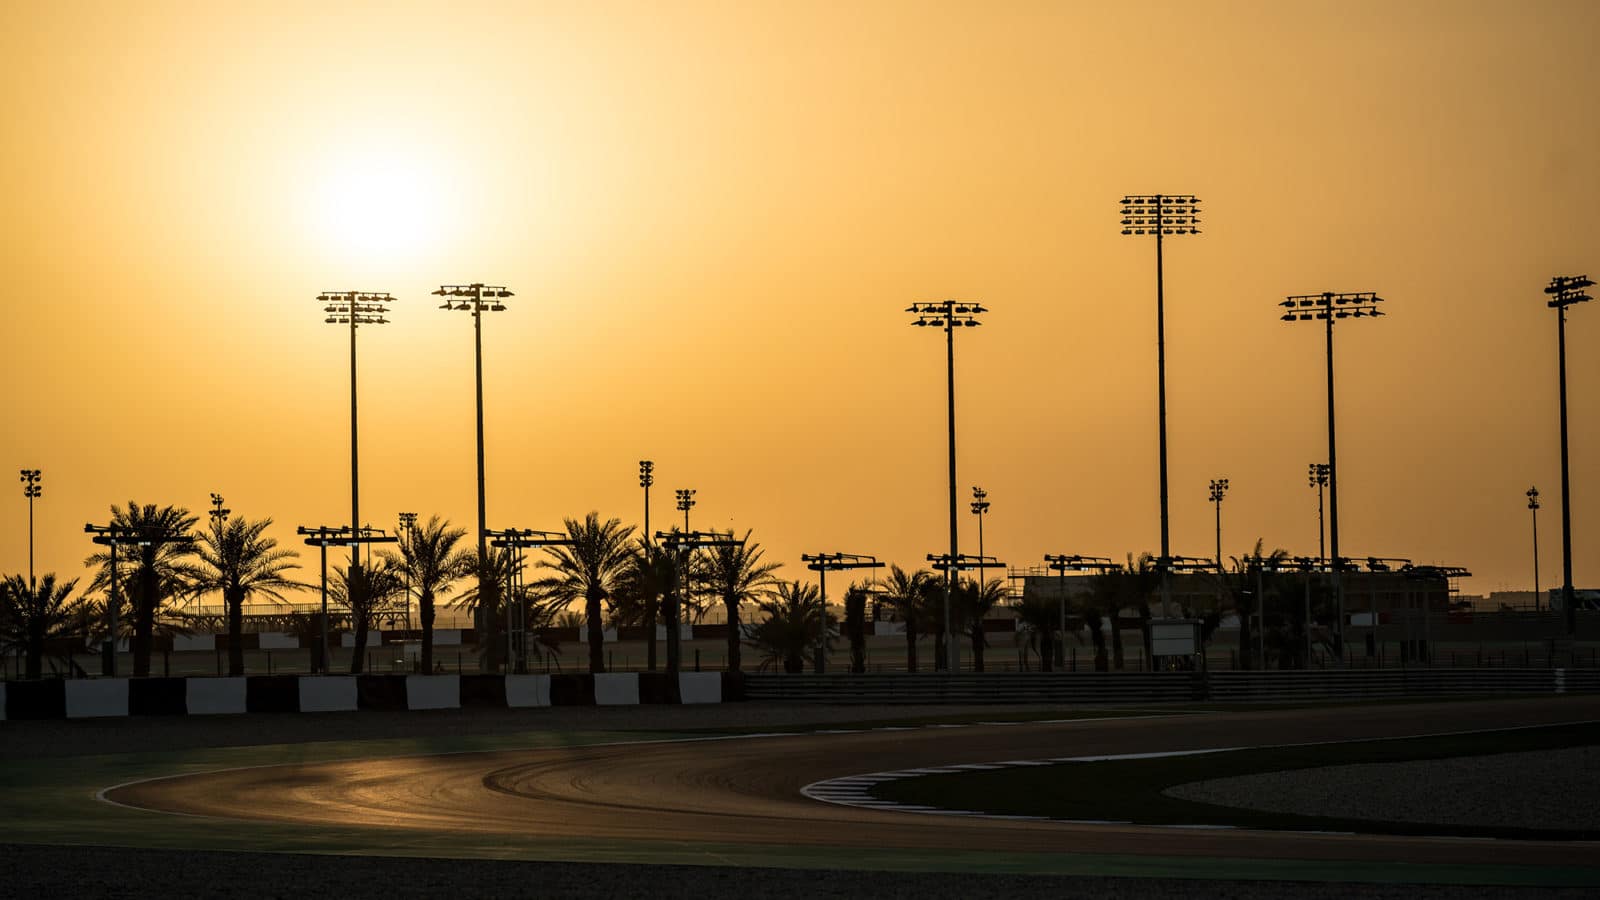 Sunset at Losail circuit in Qatar